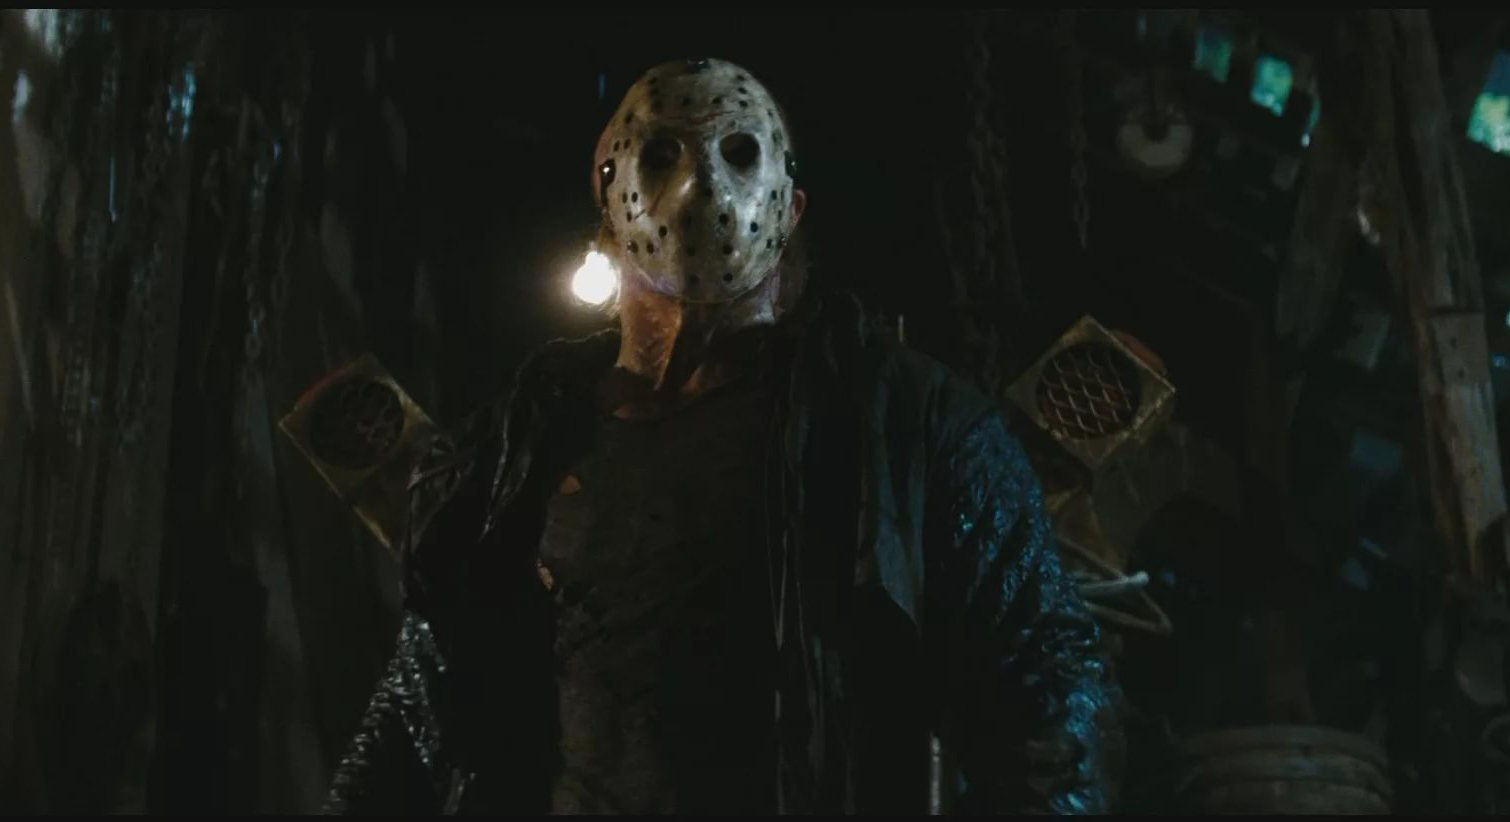 His Name Was Jason- Ranking the Friday the 13th Films